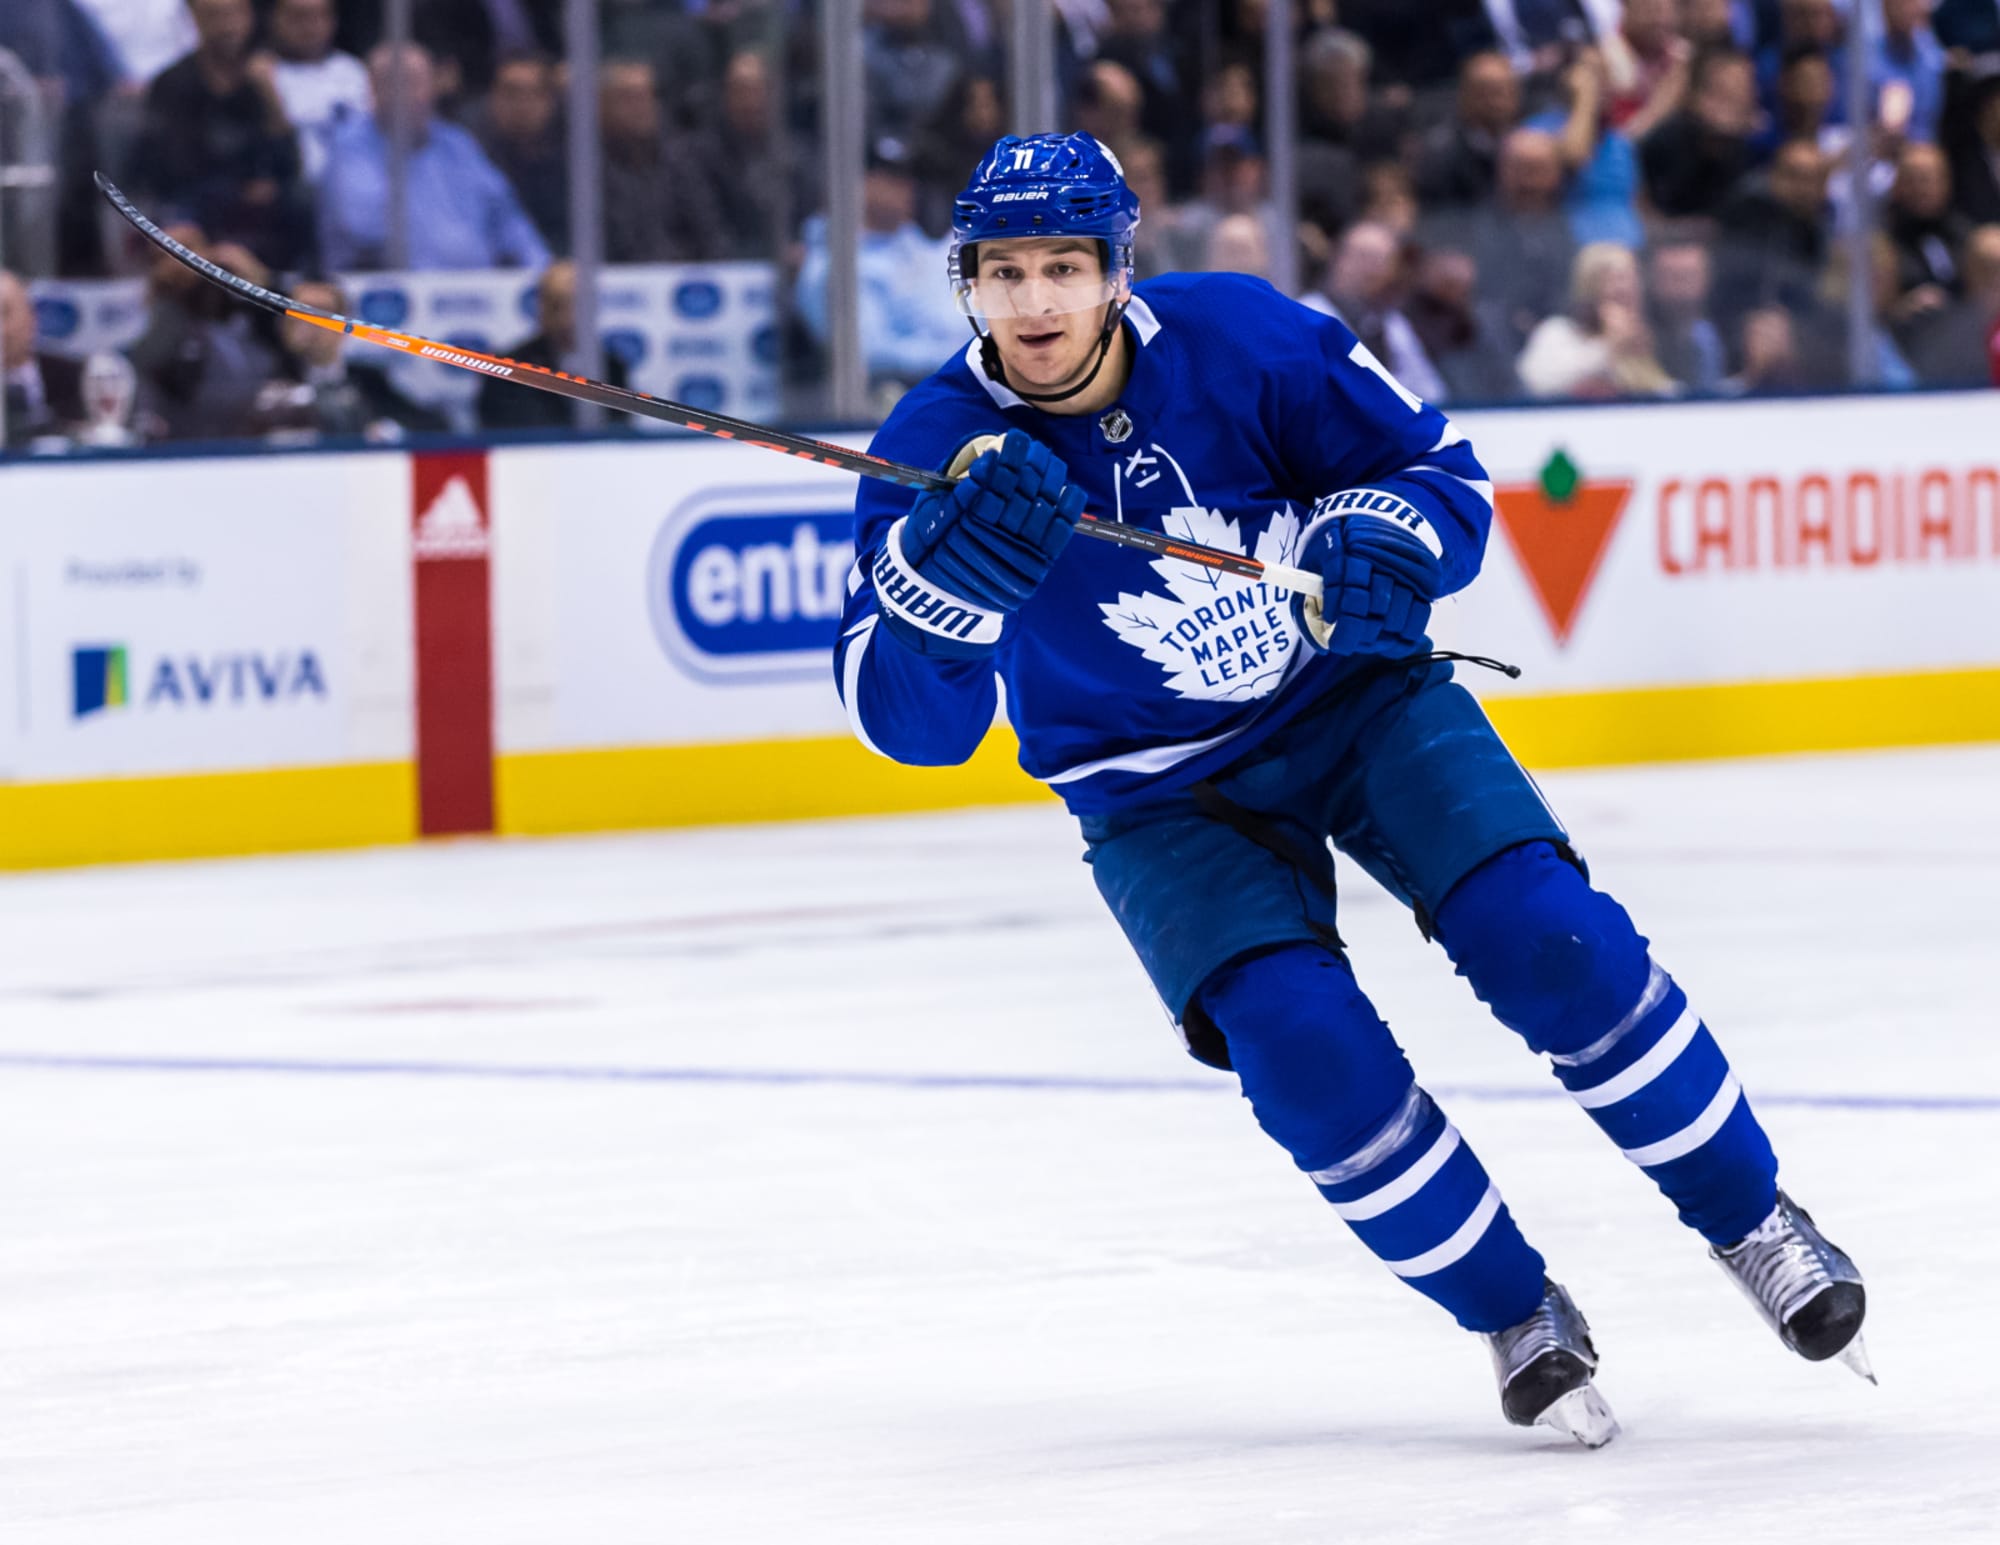 Former Maple Leafs forward Zach Hyman comments on Toronto's early